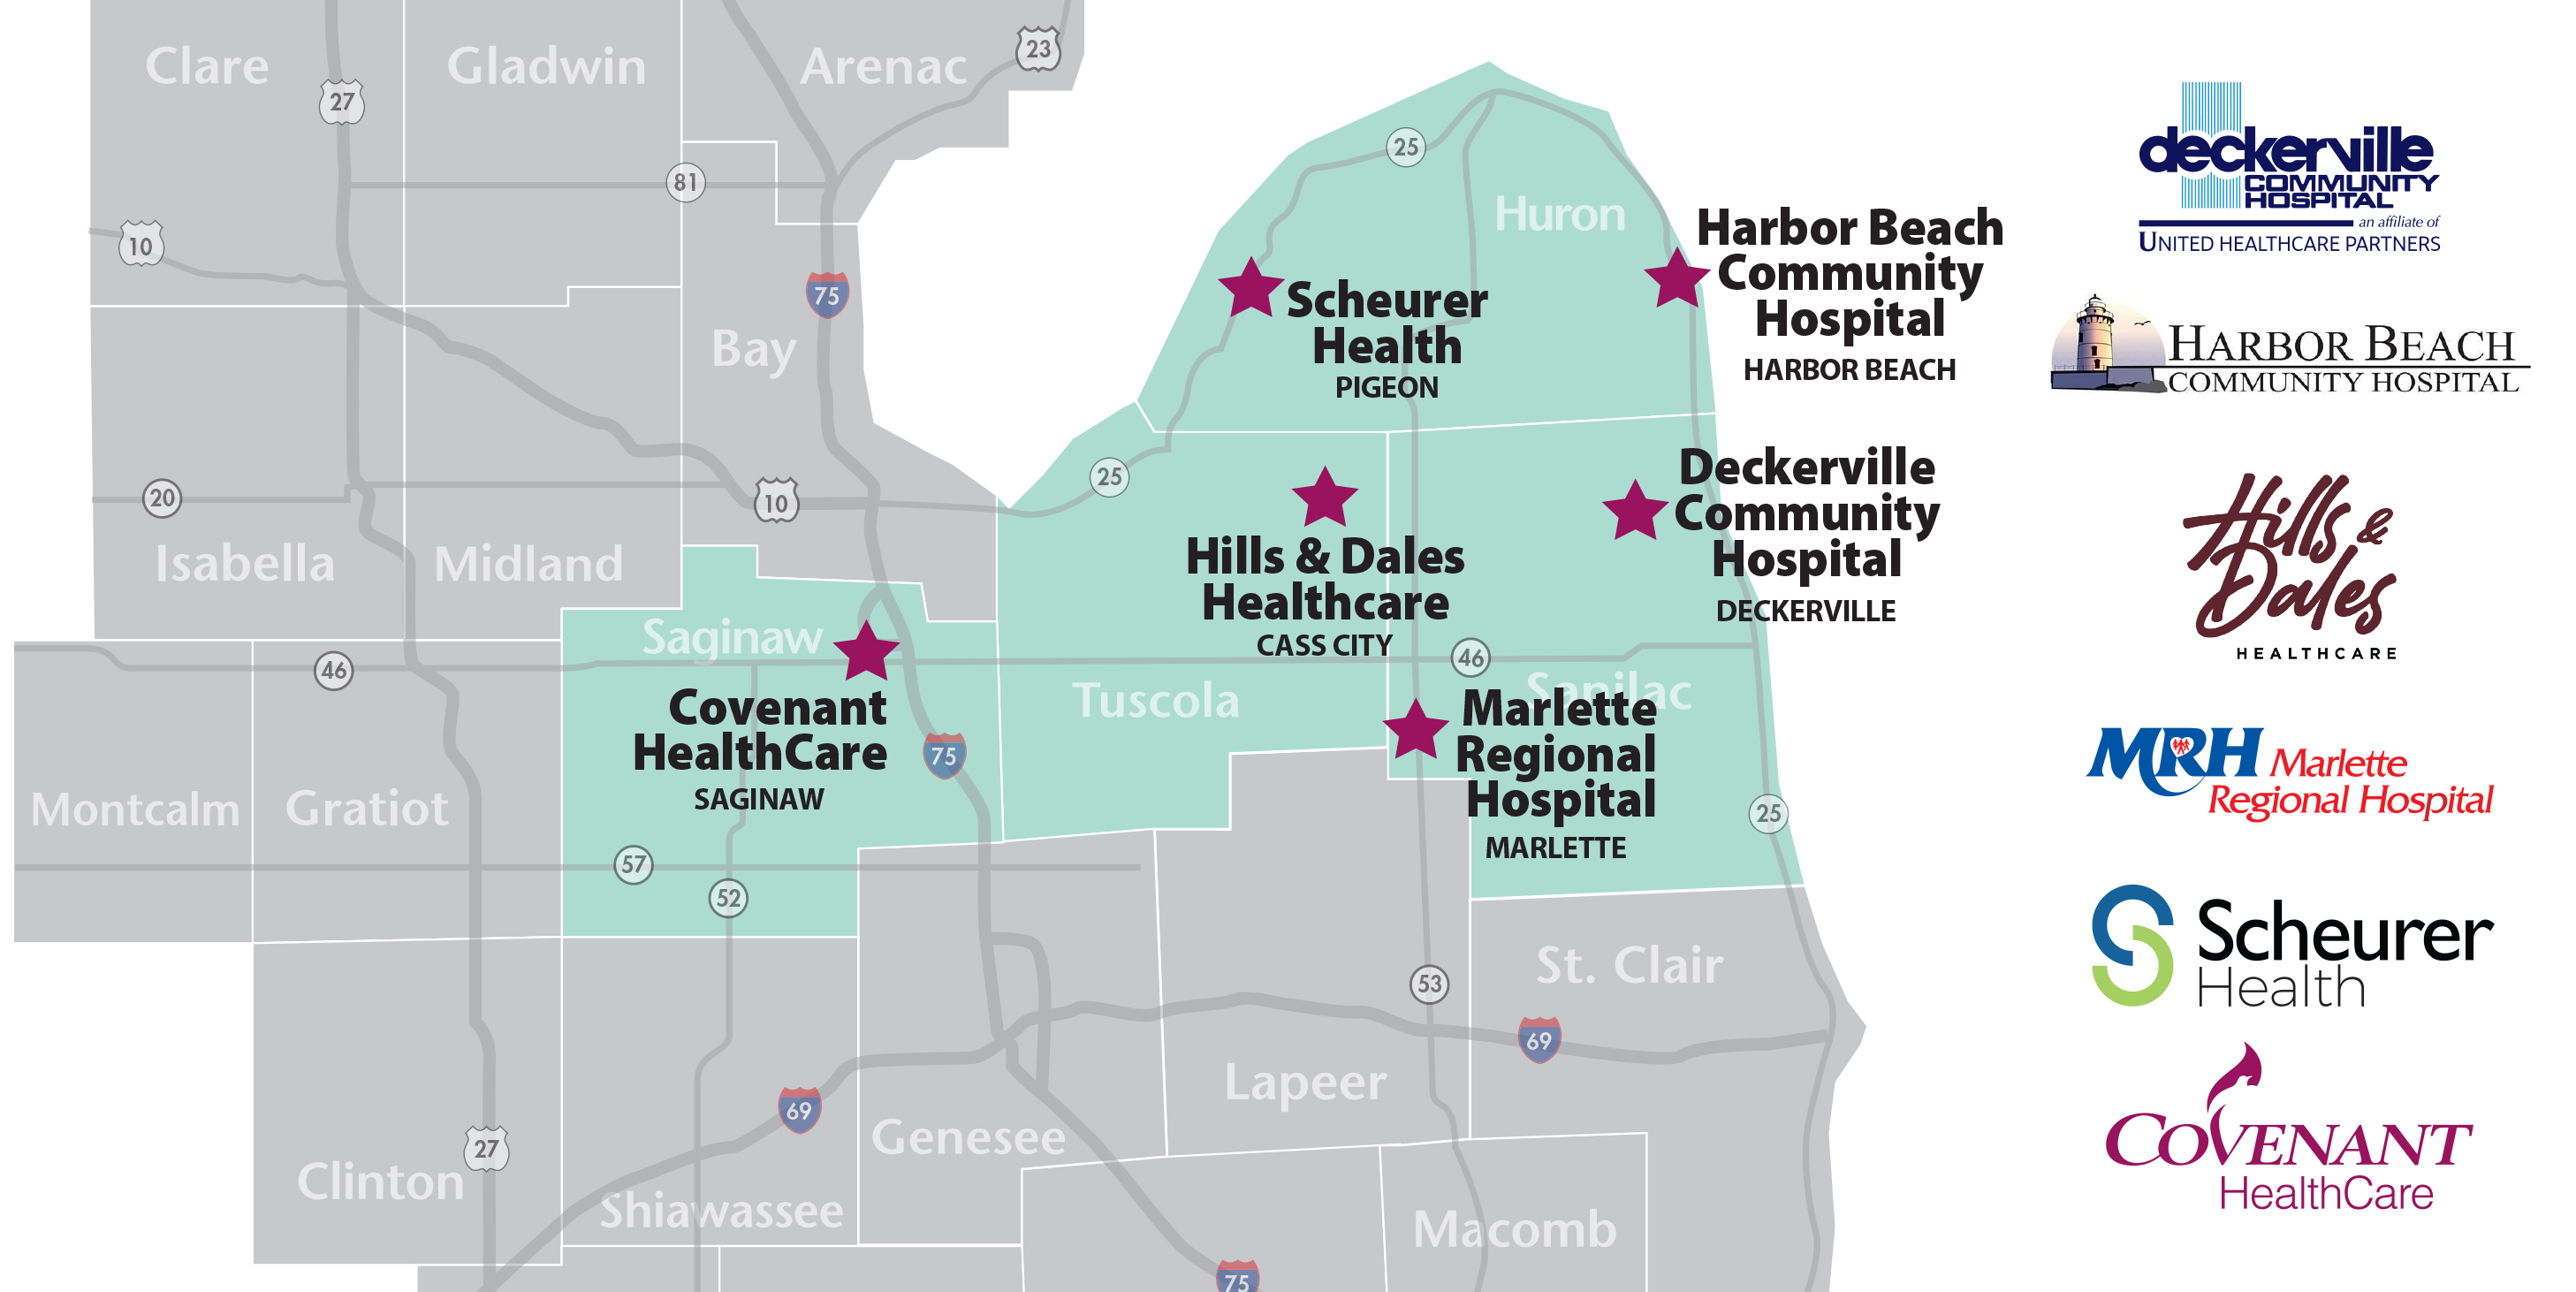 Map showing locations of Covenant Regional Thumb Network Hospitals